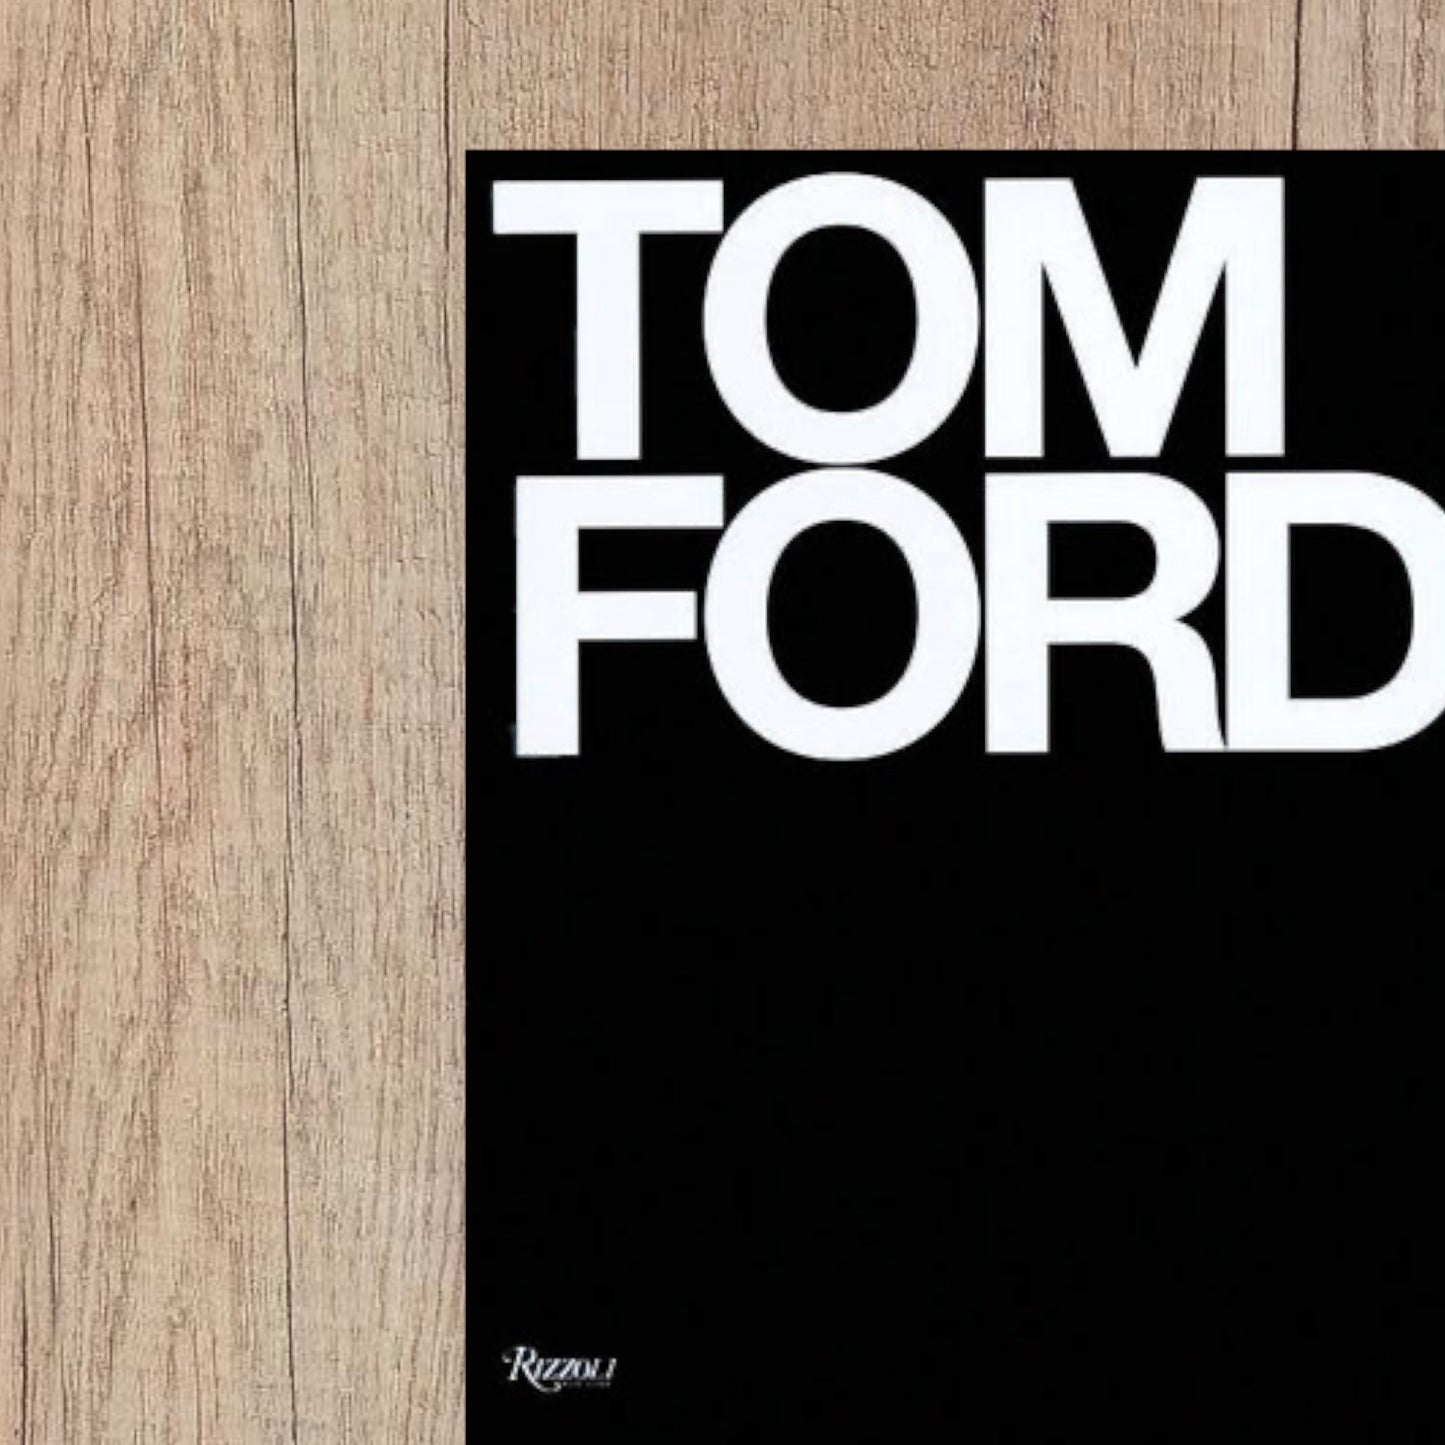 TOM FORD Hardcover | Book Rizzoli | Curated Home Decor